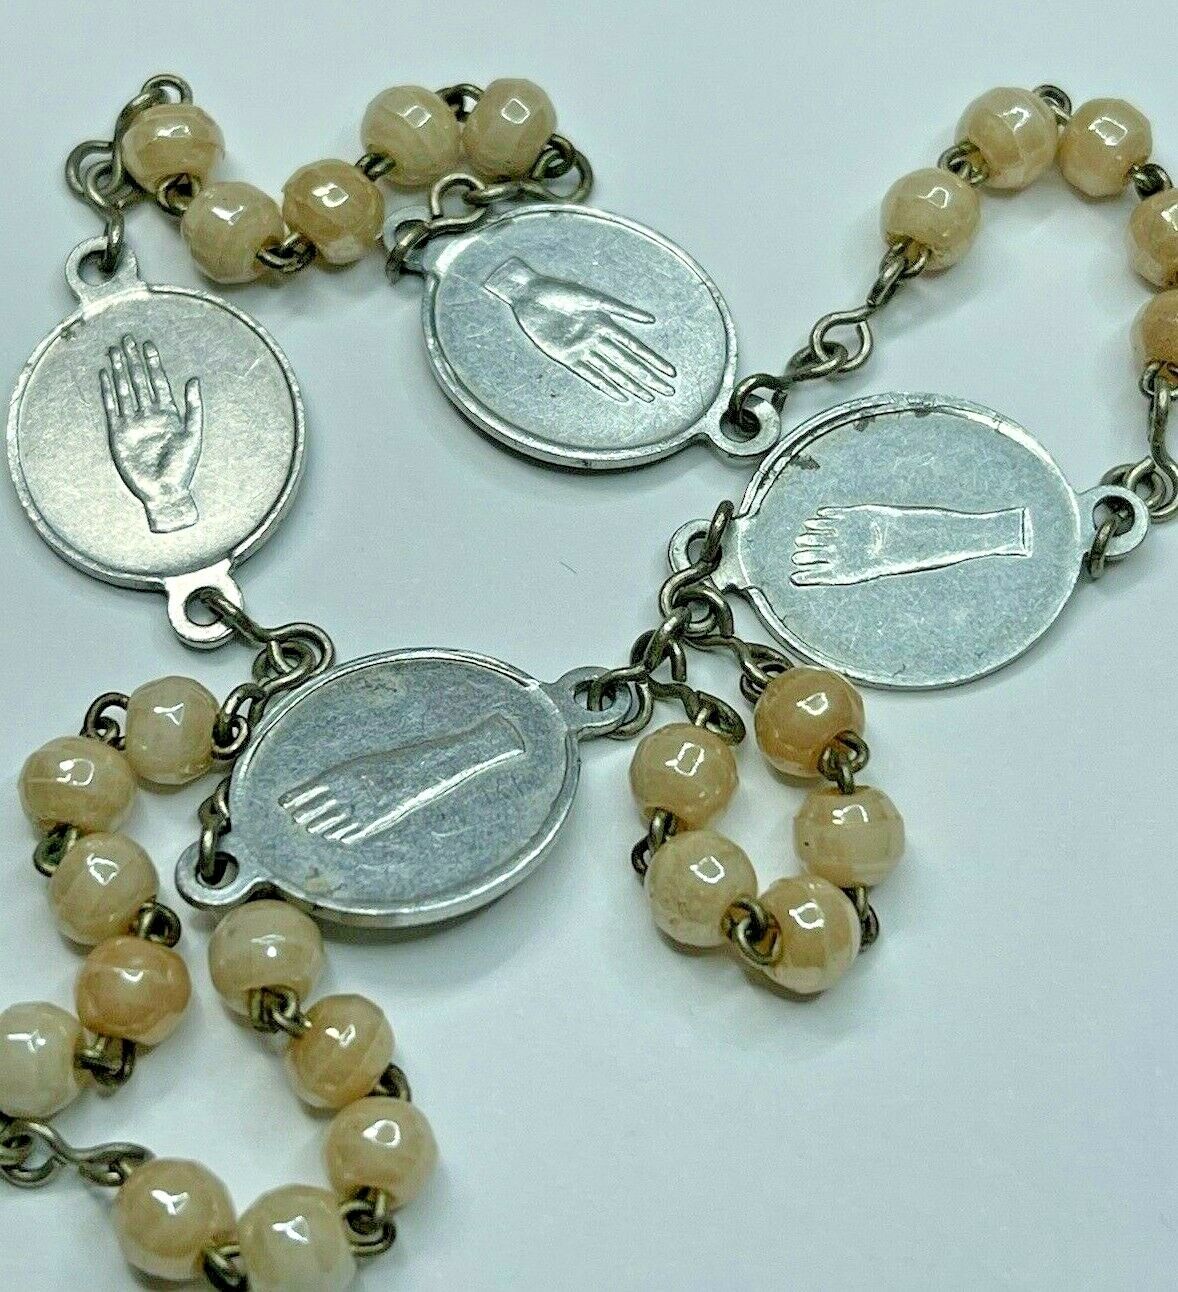 † SCARCE ANTIQUE FIVE WOUNDS OF JESUS STIGMATA GLOSSY GLASS ROSARY CHAPLET  †